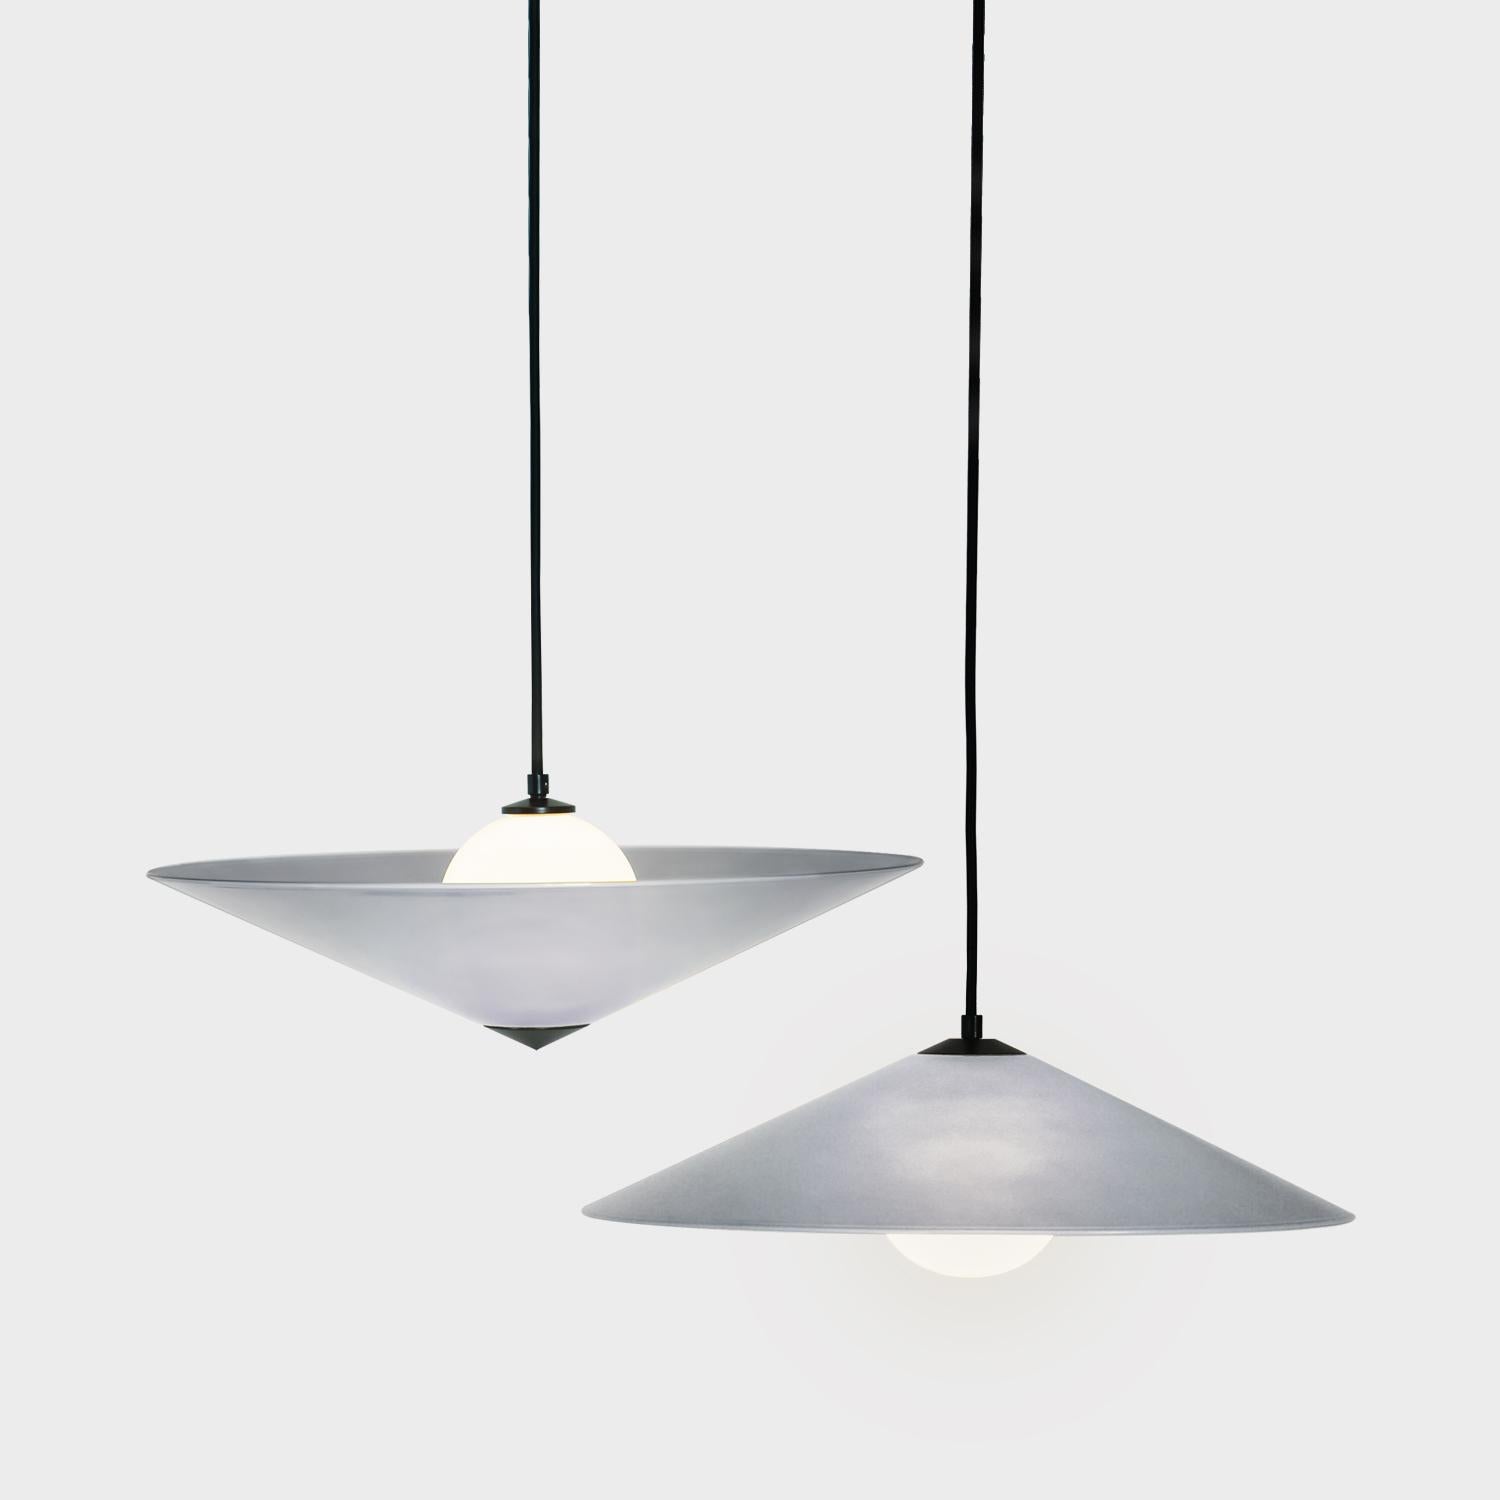 Designed & First Produced 2022 (By Riya Panchal of MESEME Studio)

About MARSHA Collection – Consisting of Pendant Lights and Table Lamps
Influenced by the unwavering determination of the Roman war goddess, our MARSHA Collection embodies